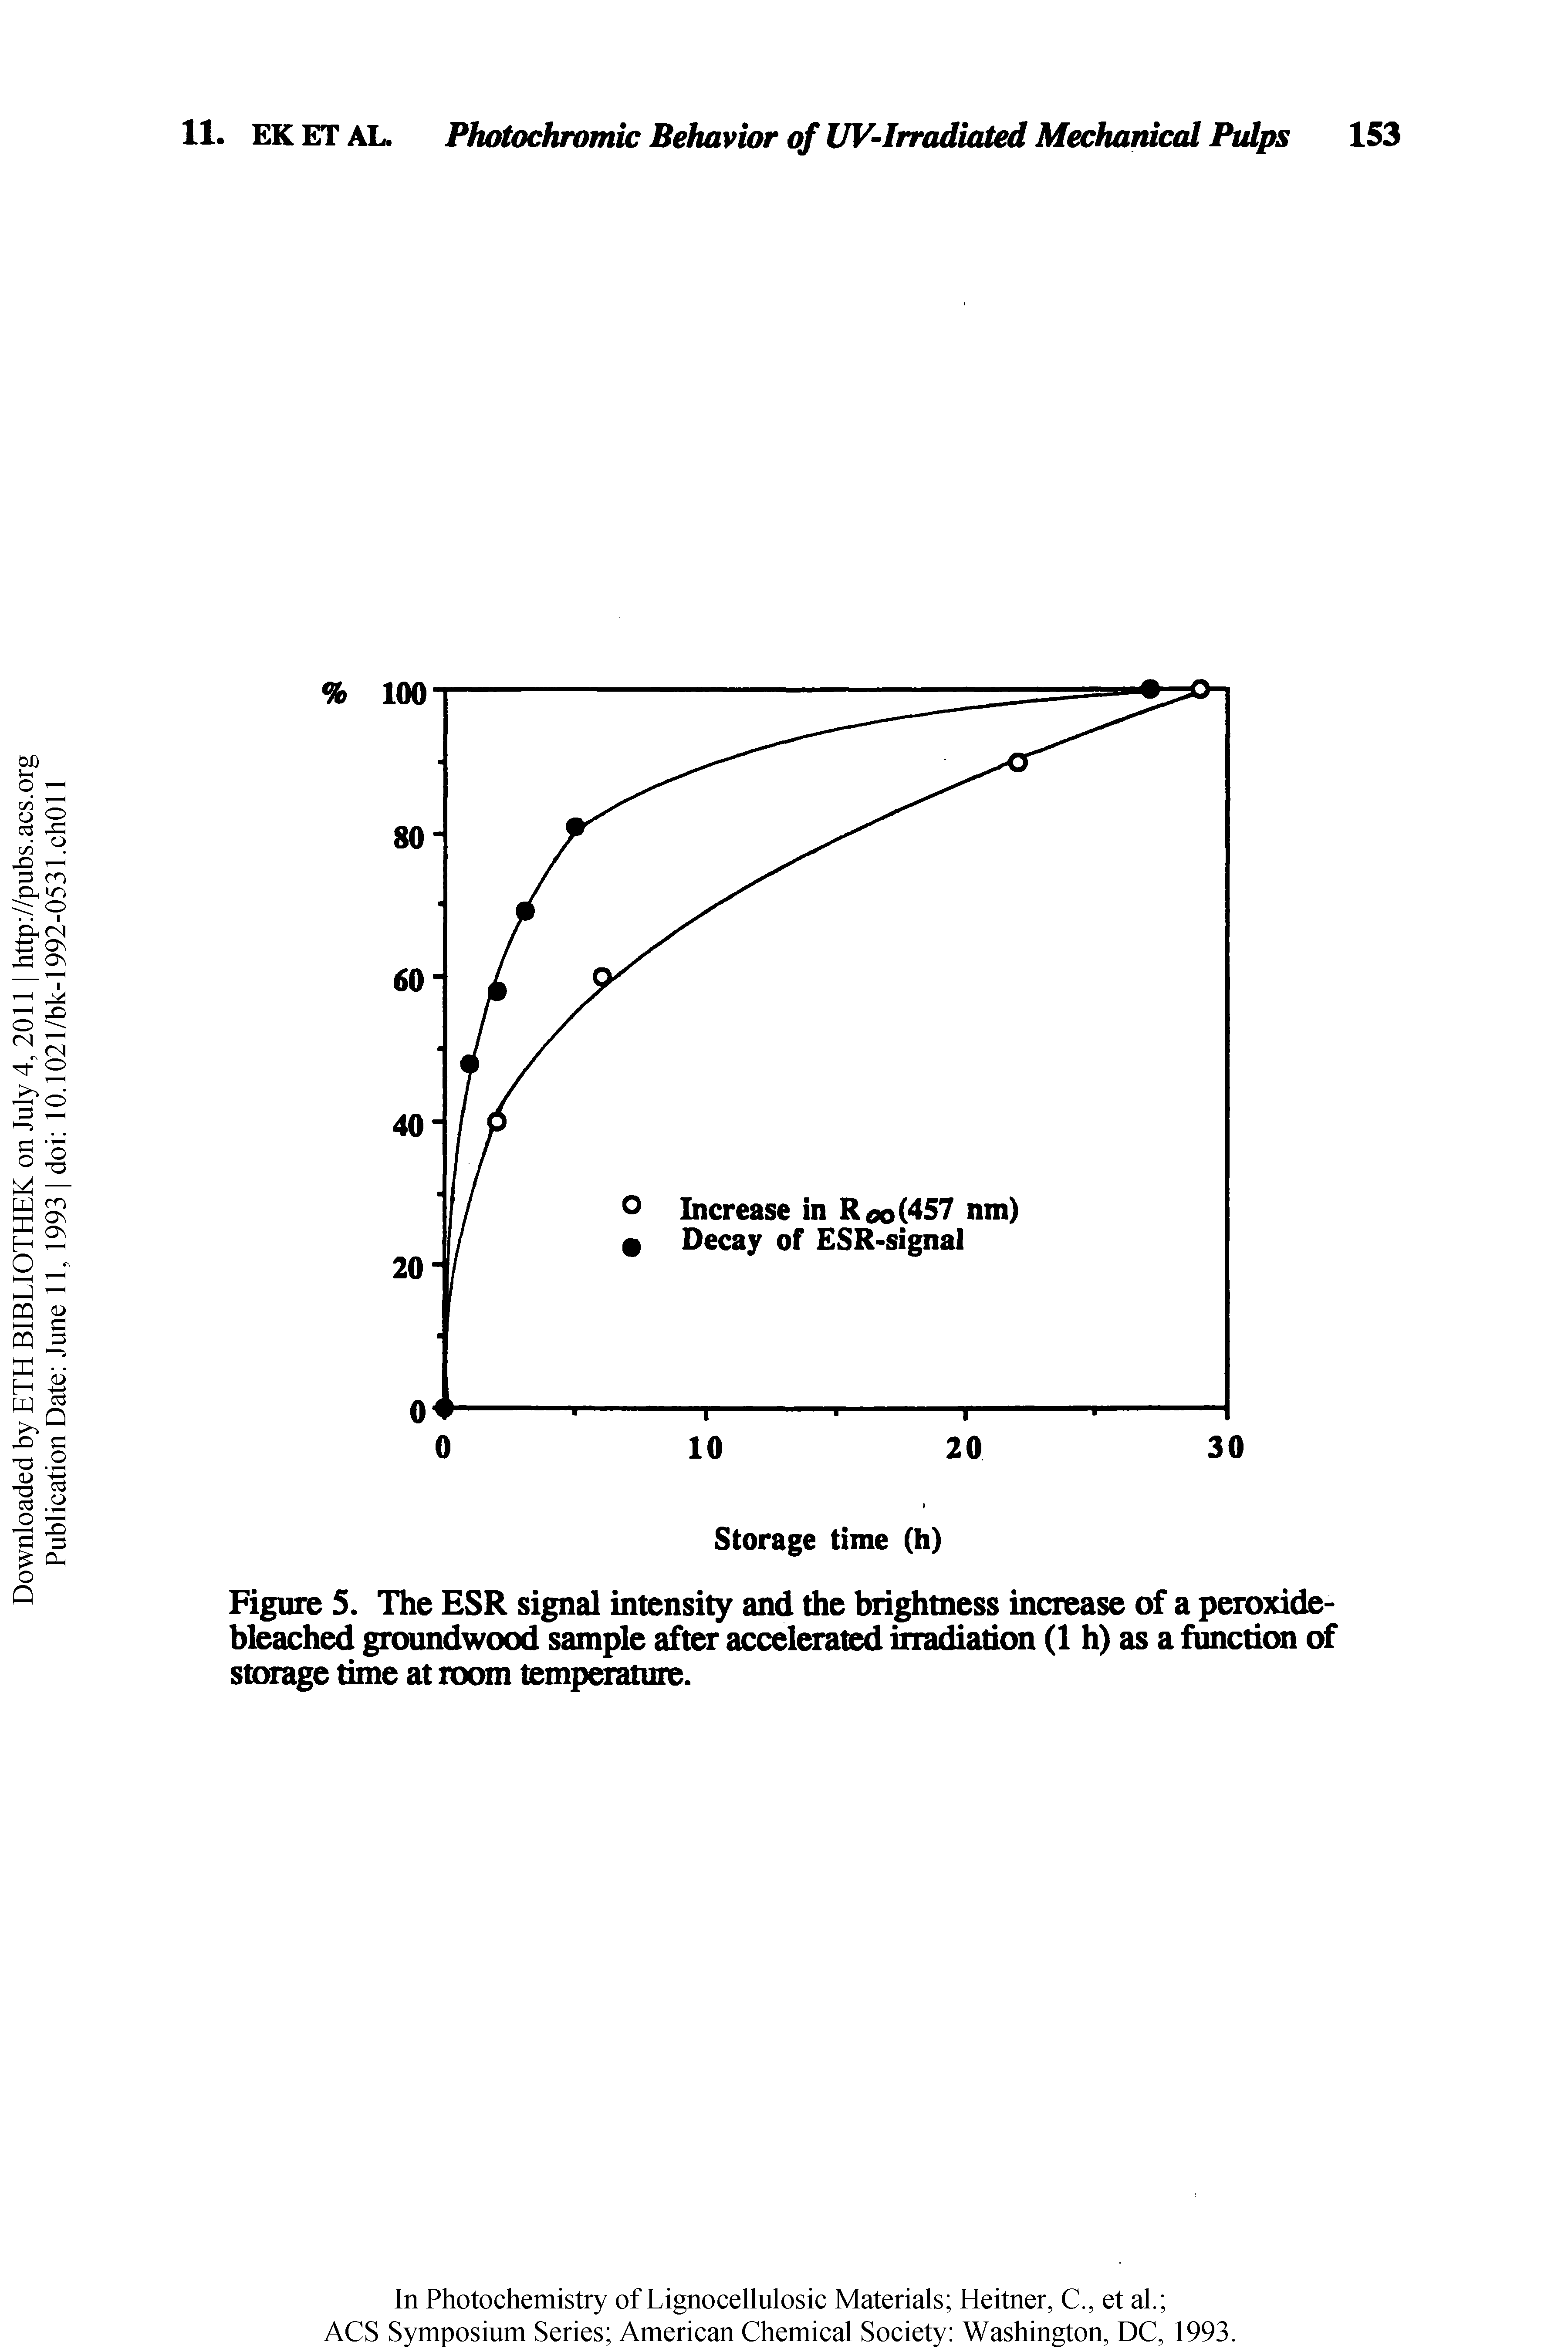 Figure 5. The ESR signal intensity and the brightness increase of a peroxide-bleached groundwood sample after accelerated irradiation (1 h) as a function of storage time at room temperature.